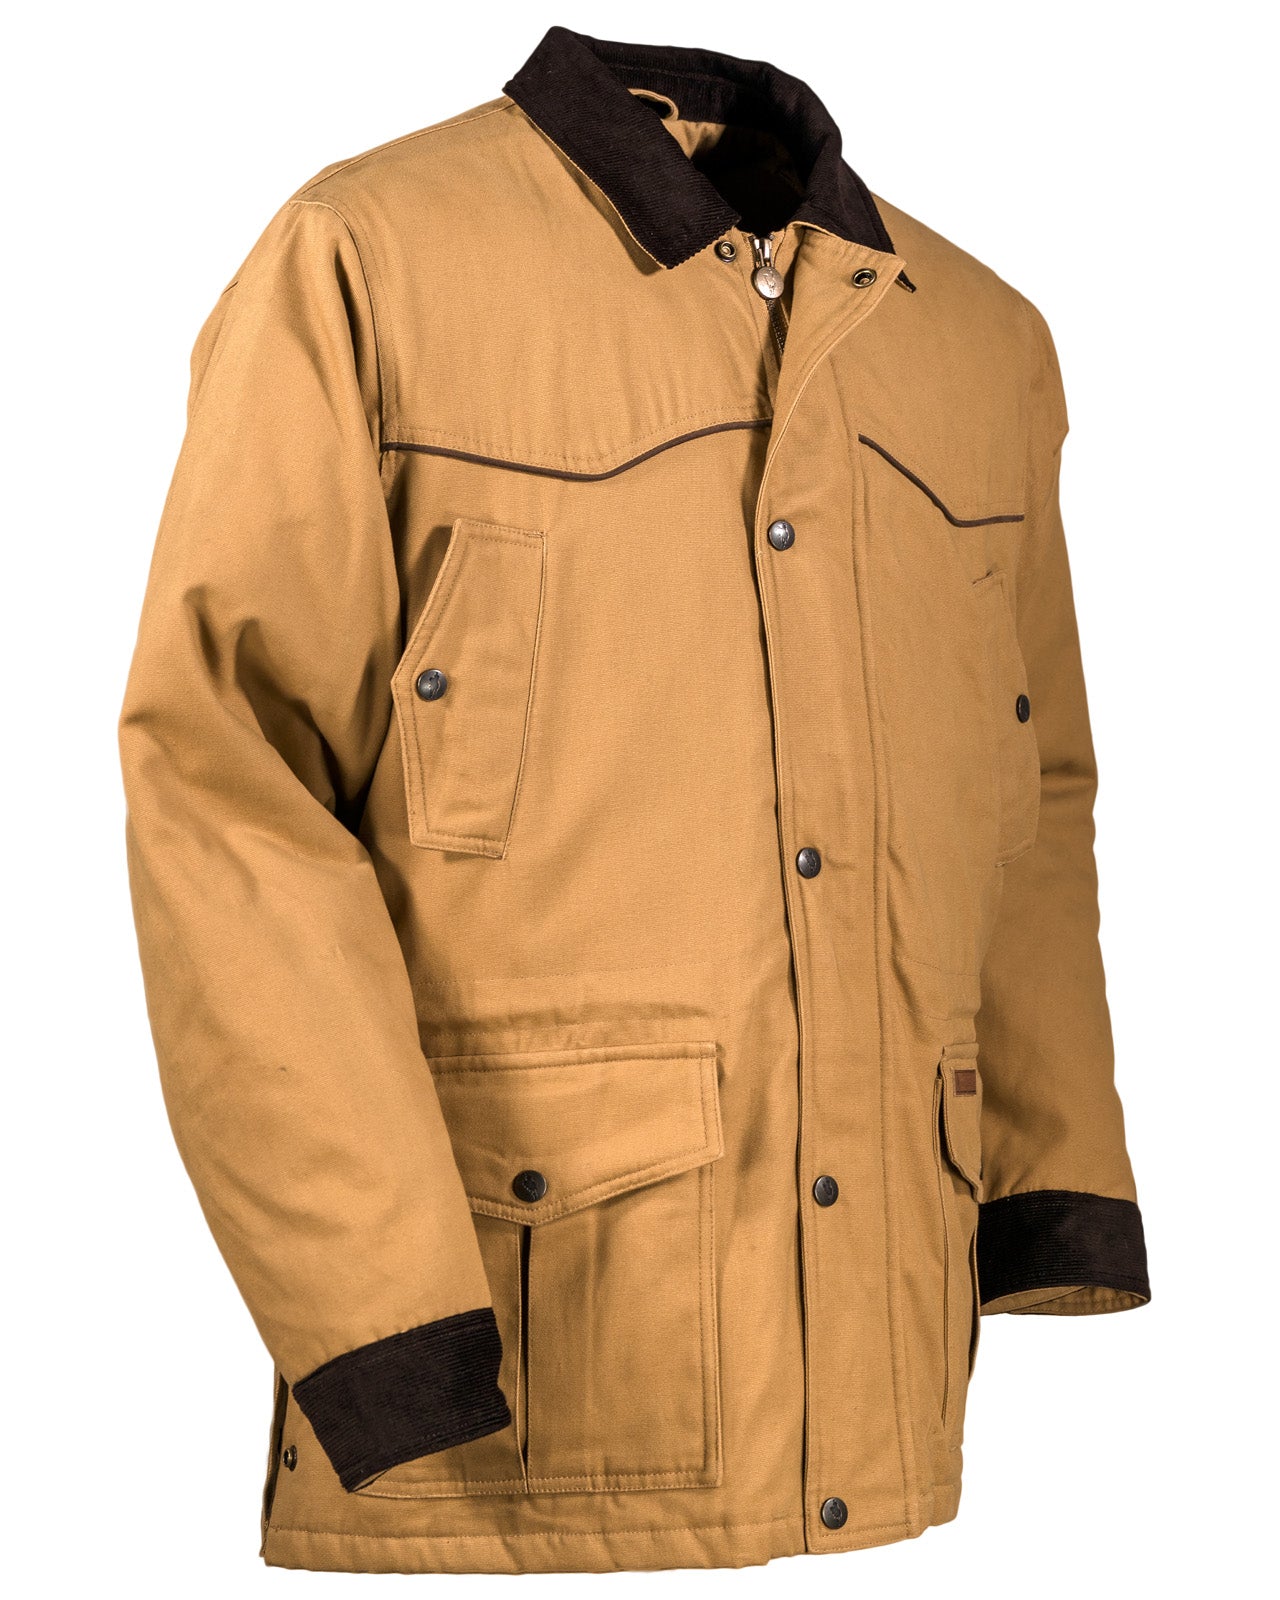 Cattleman Conceal Carry Jacket